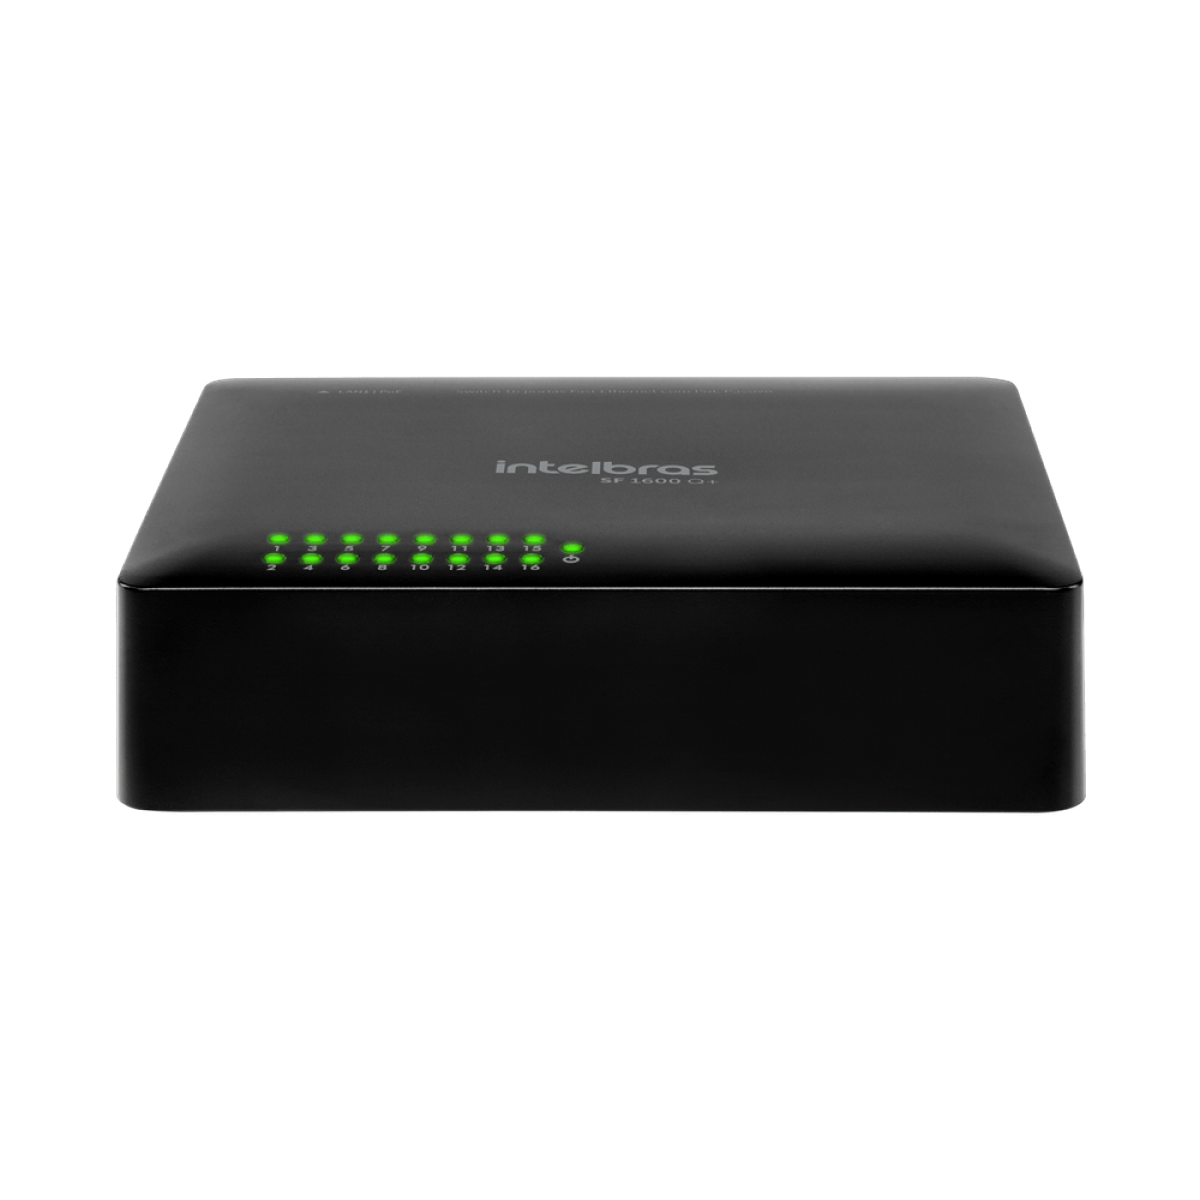 Switch Intelbras SF 1600 Q+, 16 portas 10/100 Mbps, Fast Ethernet